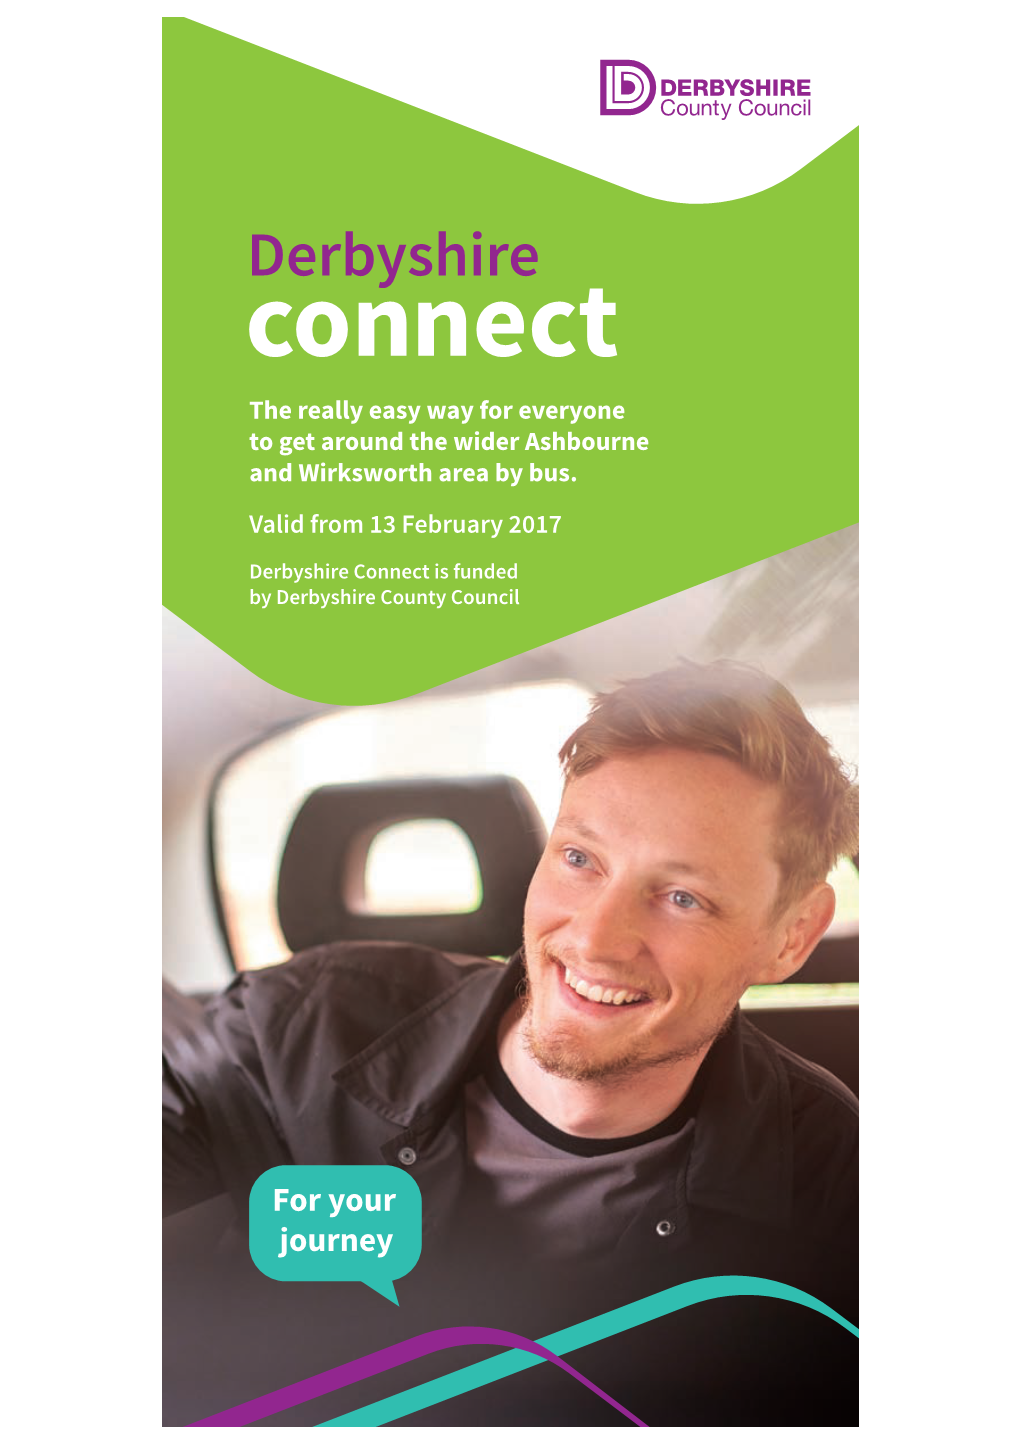 Derbyshire Connect Is a Brand New Bus Service for Everyone – Making It Easier for You to Get Around